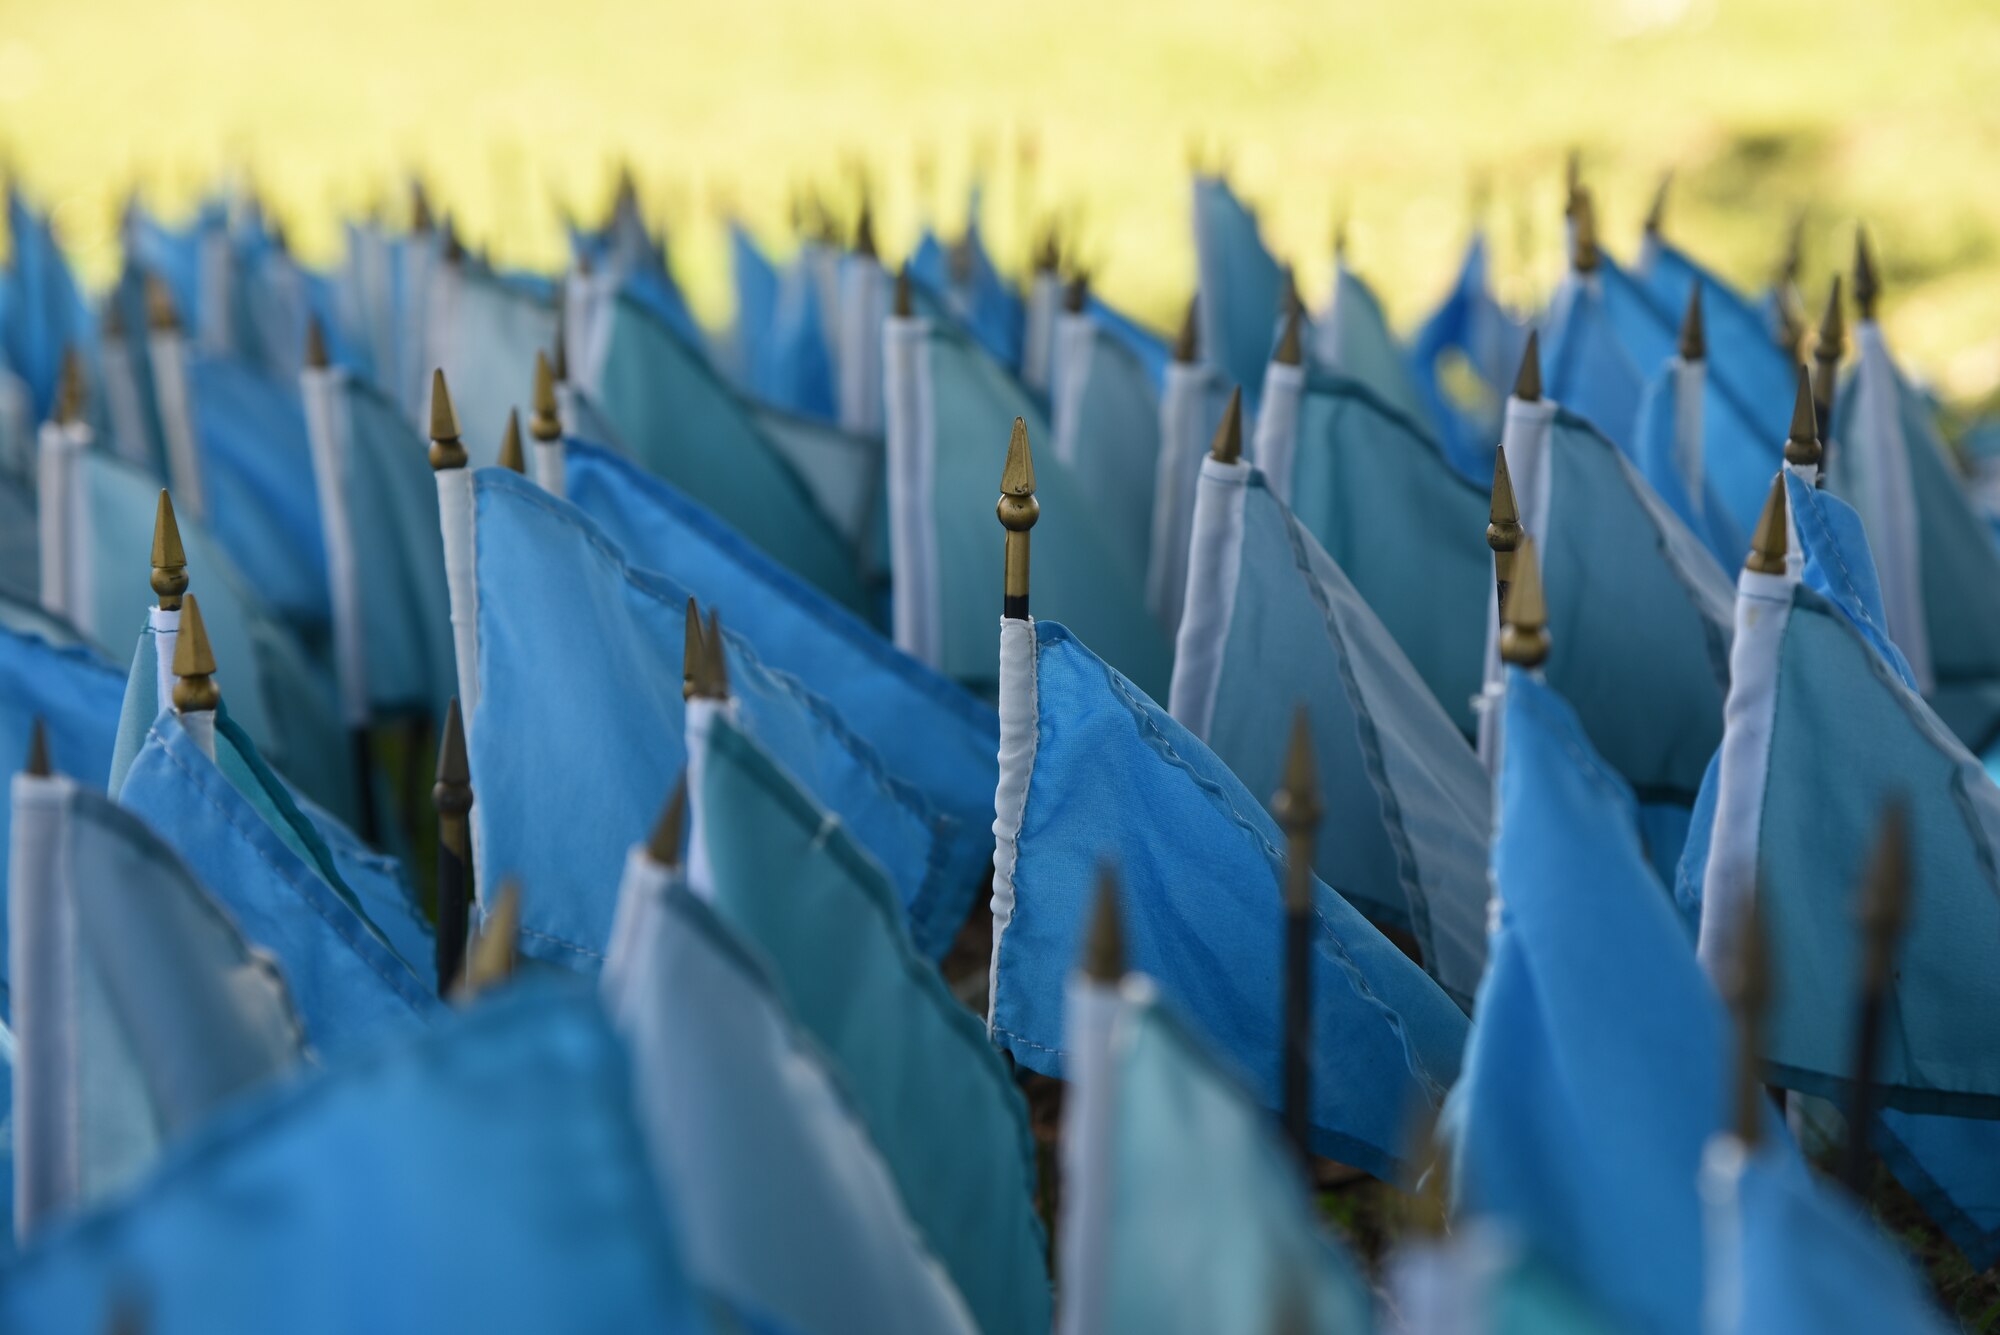 Teal-colored flags are displayed for Sexual Assault Awareness Month near the intersection of Larcher Blvd. and Meadows Dr. at Keesler Air Force Base, Mississippi, April 18, 2018. Each flag represents one Air Force member who reported being sexually assaulted in fiscal year 2015. The 1,312 flag display will be moved to several locations around the base throughout the month. (U.S. Air Force photo by Kemberly Groue)